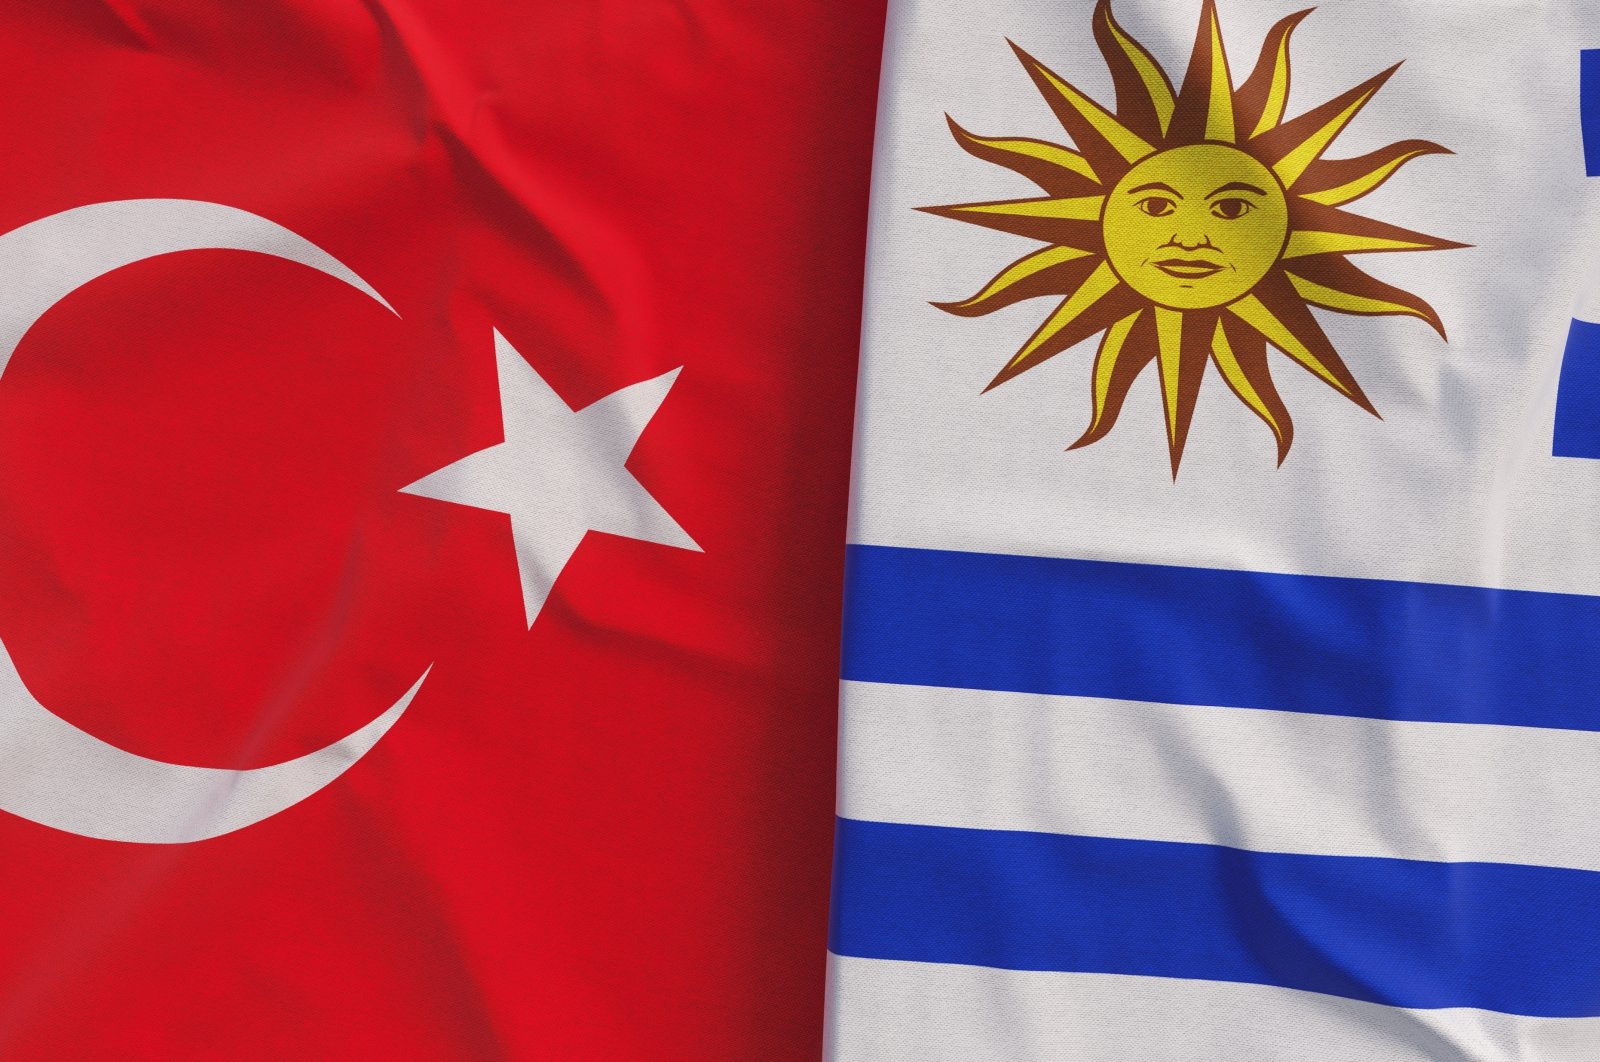 The flags of Türkiye and Uruguay are seen in this undated photo. (Shutterstock Photo)